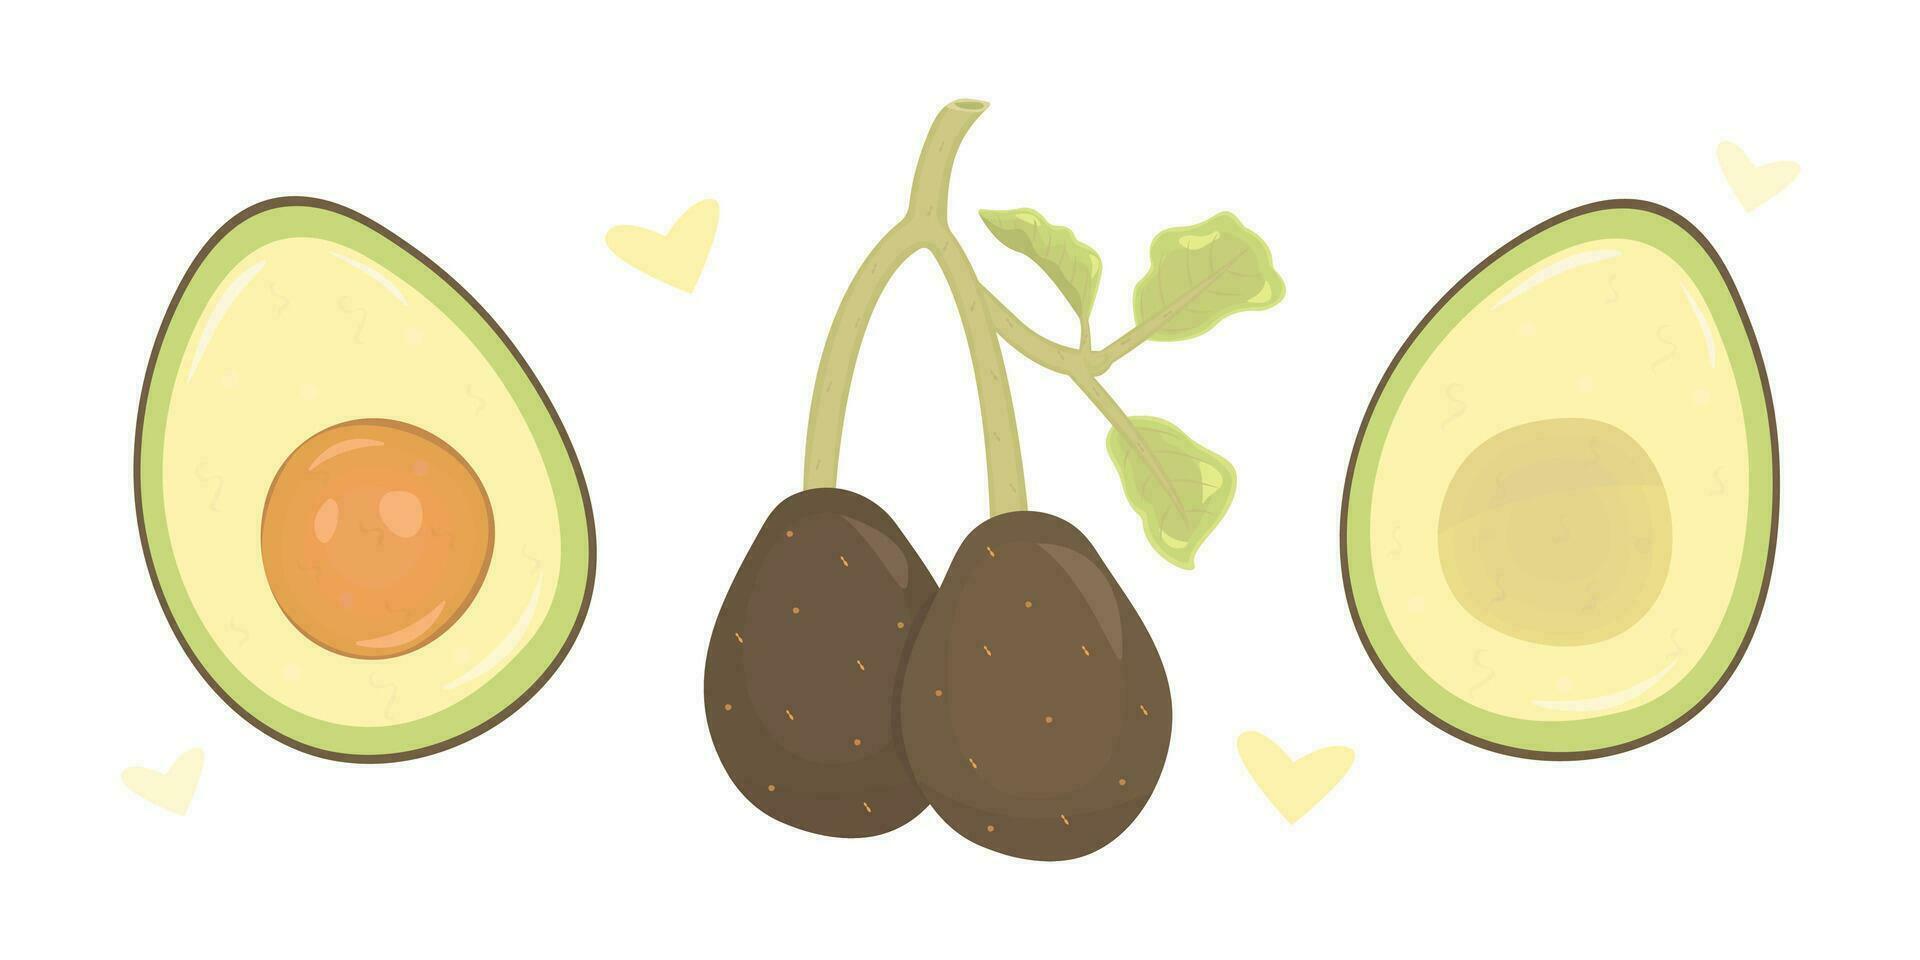 Appetizing whole and cut avocados, color vector illustration set